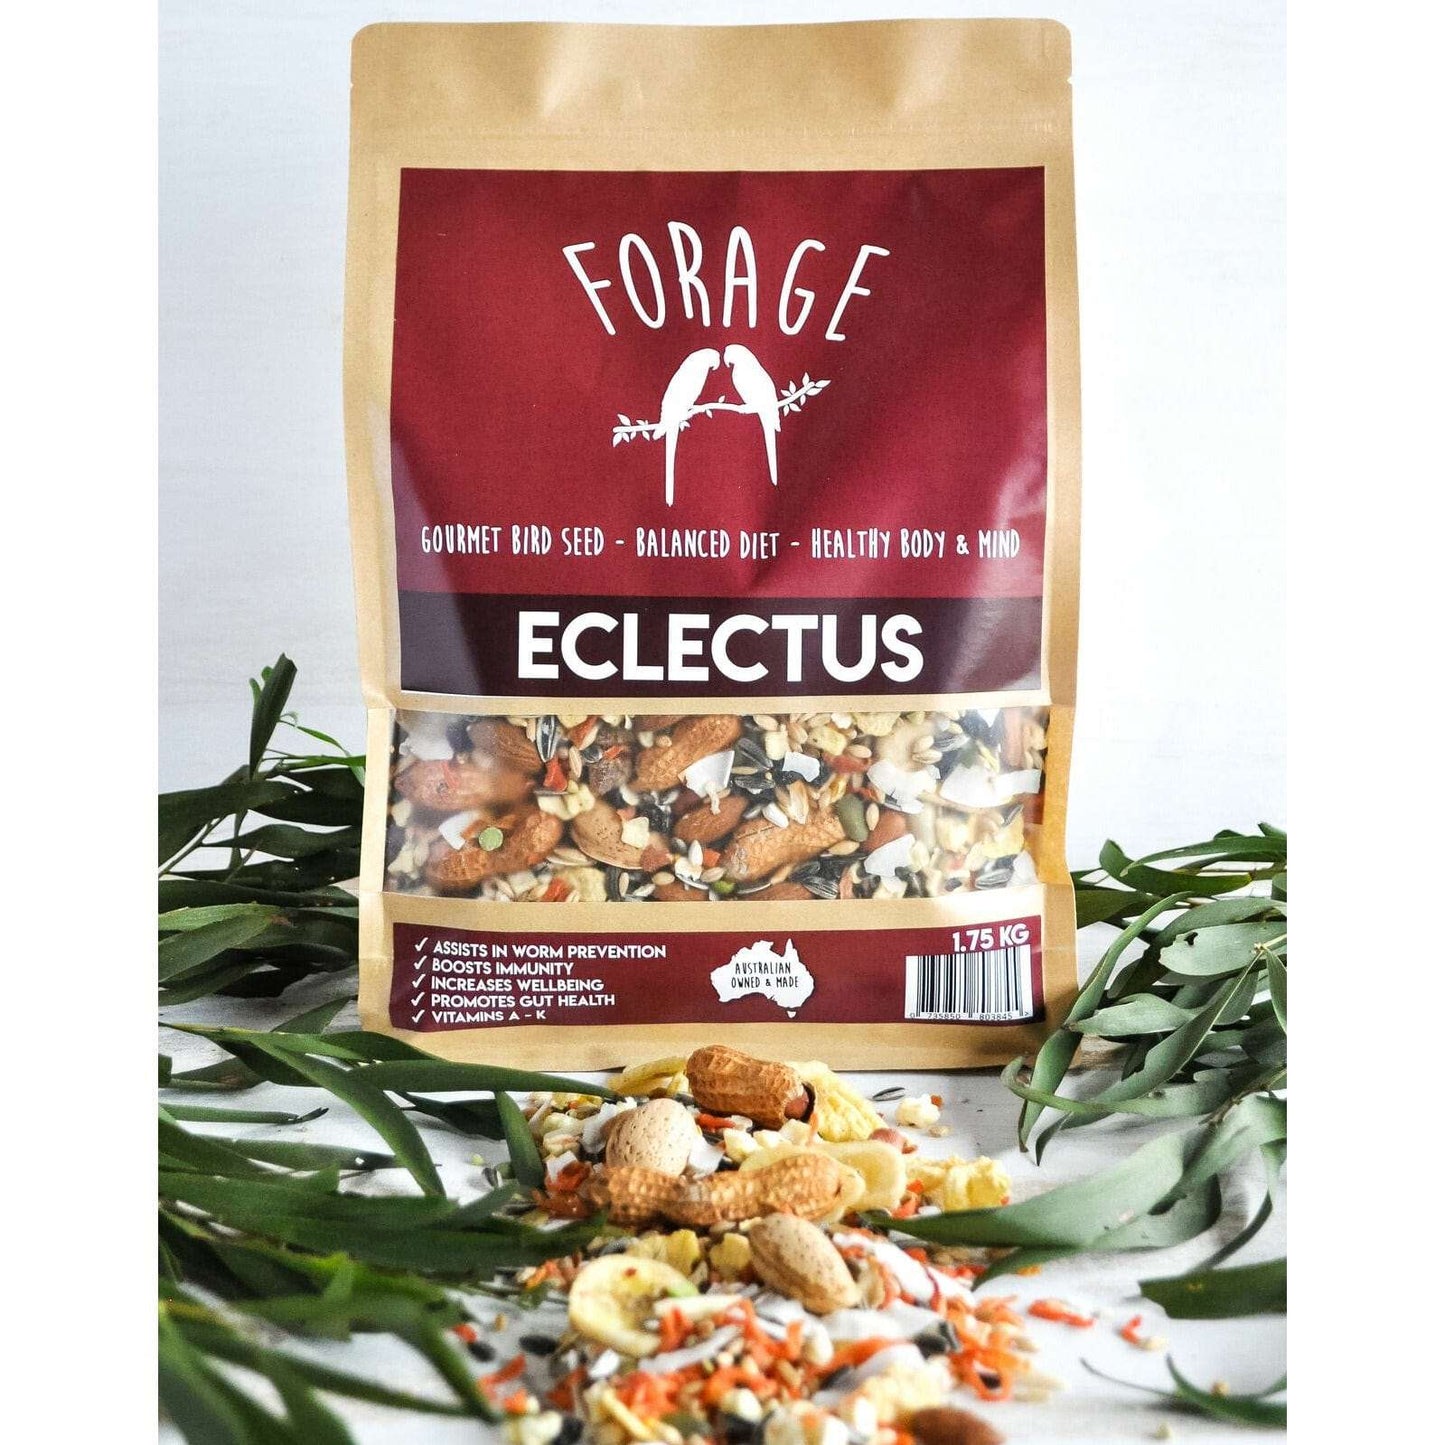 Forage Eclectus Mix (Excl. TAS & WA) from Forage Gourmet Seed